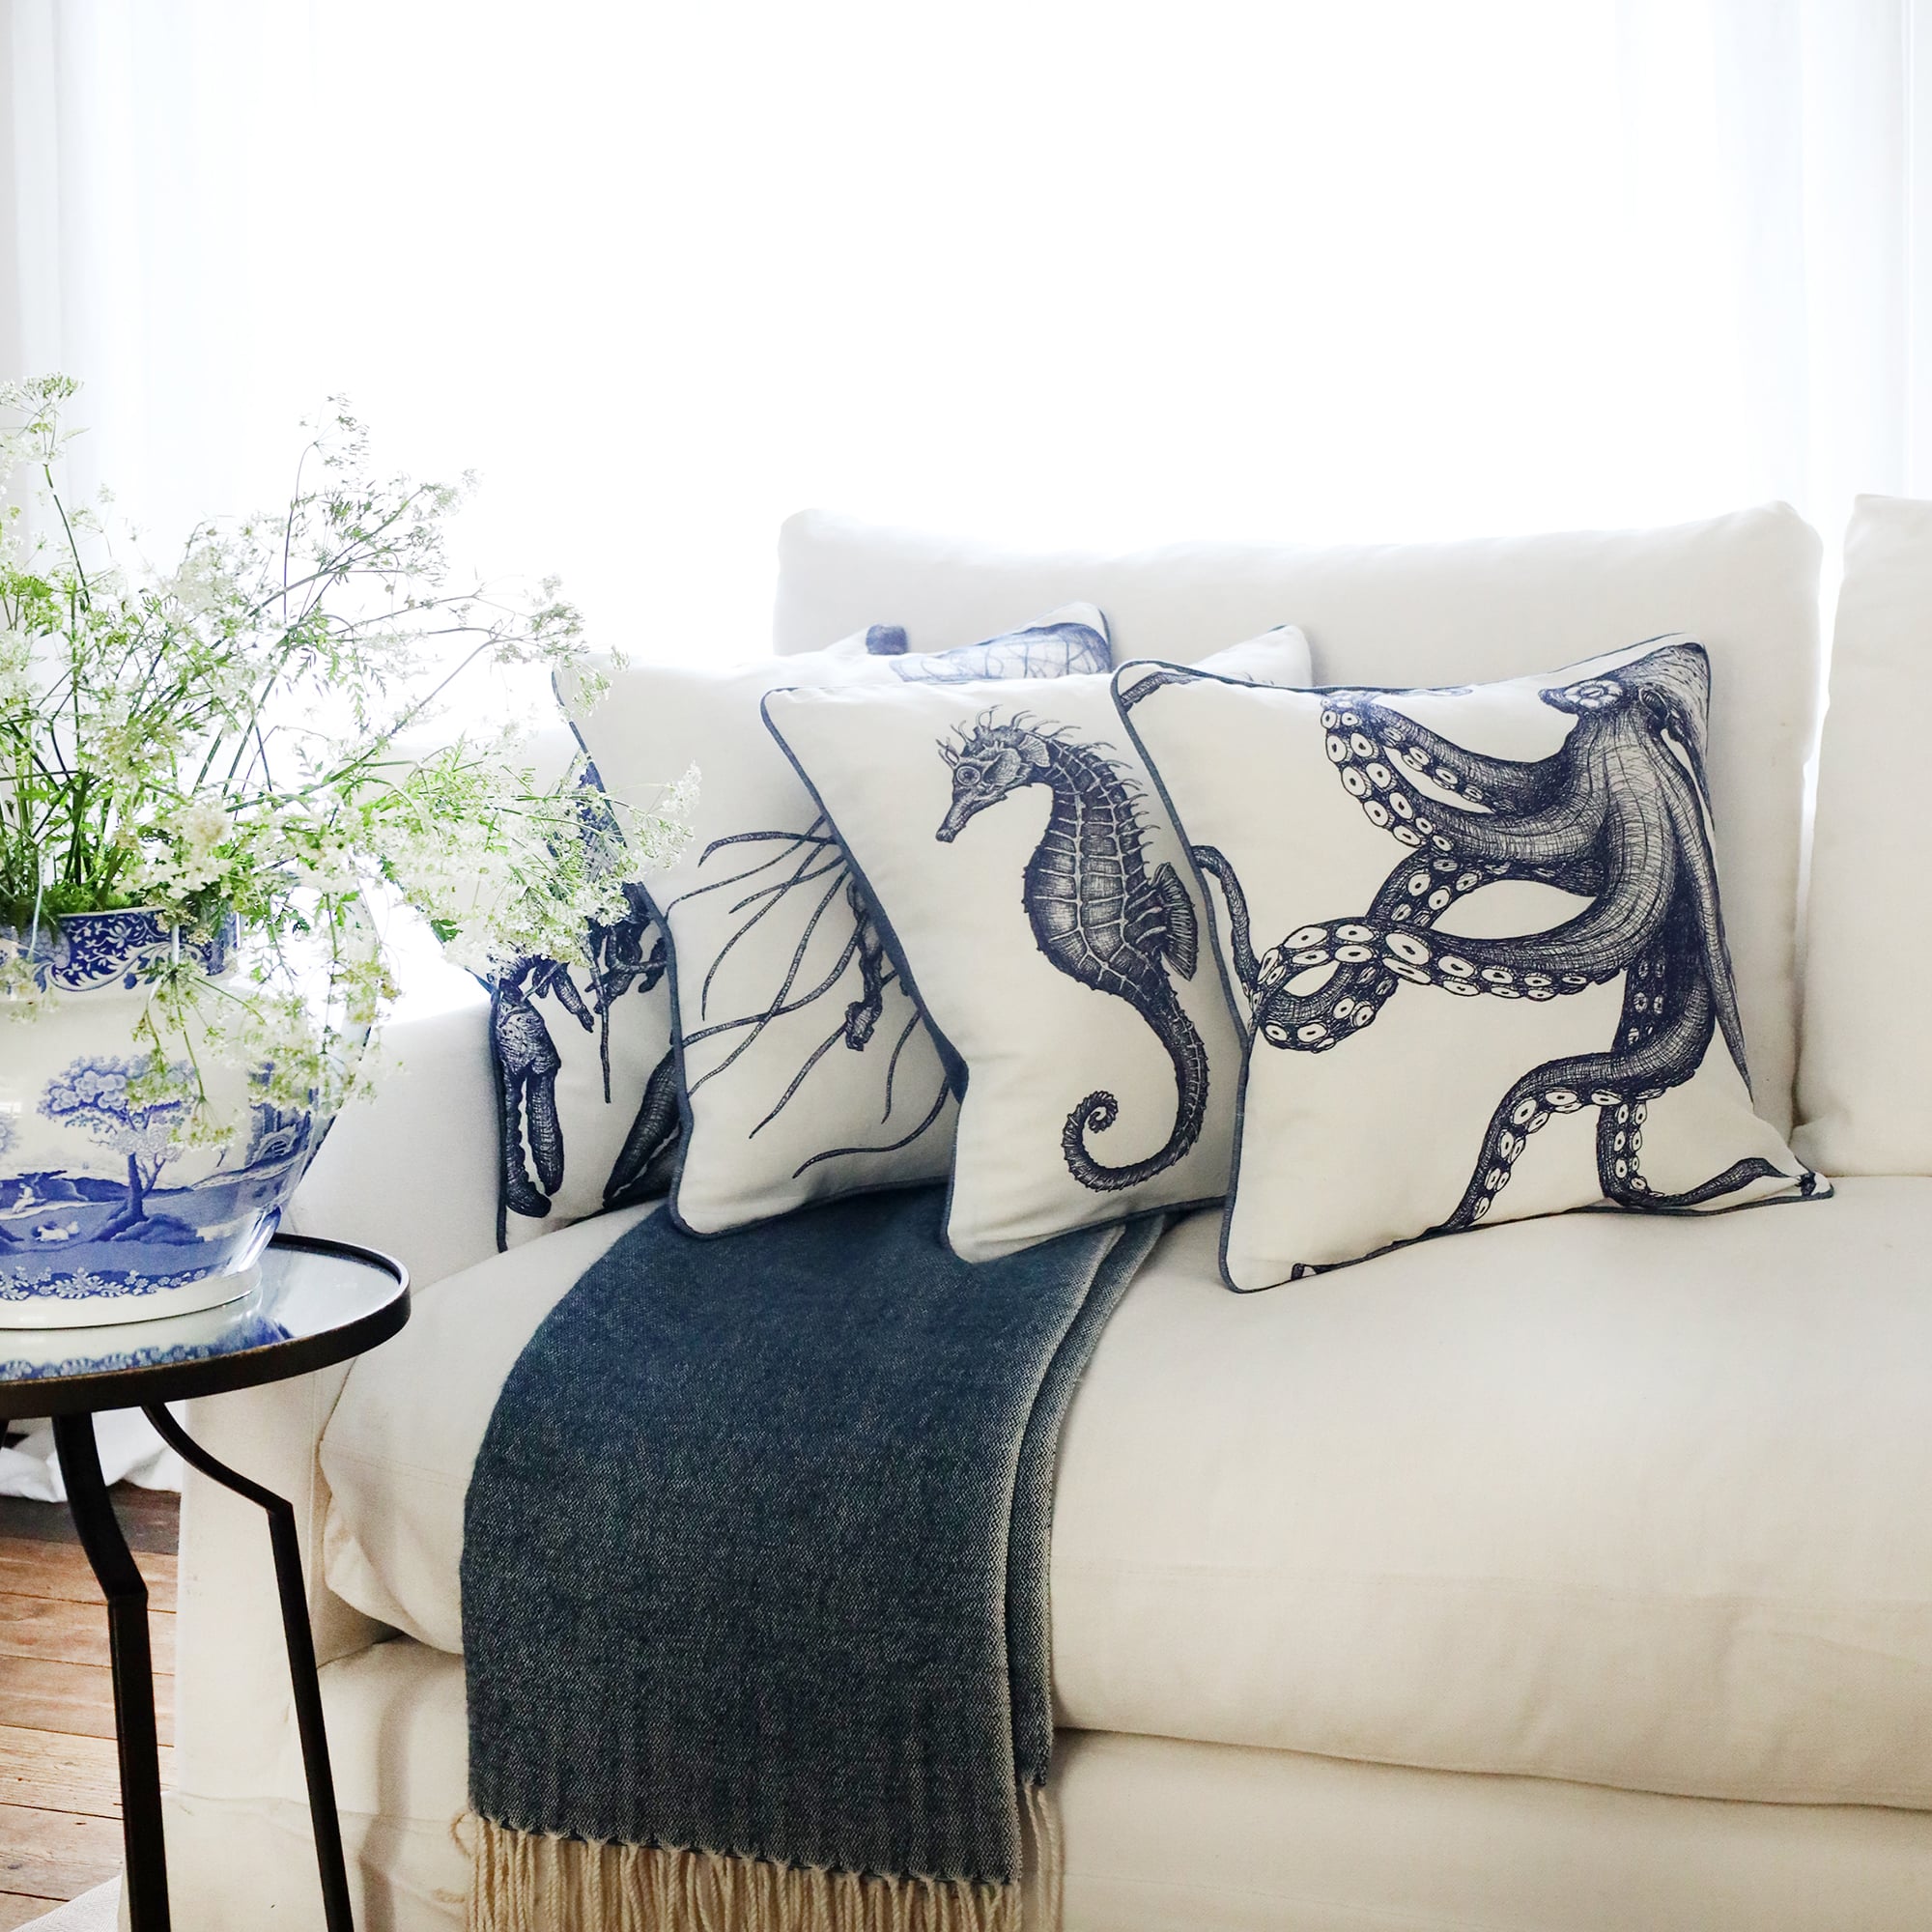 row of 4 blue & white illustrated with various sea creatures cushions and a blue & white octopus cushion at the front, sitting on a navy throw on a white sofa with bright sunlight window behind and a large willow pattern jug filled with cow parsley